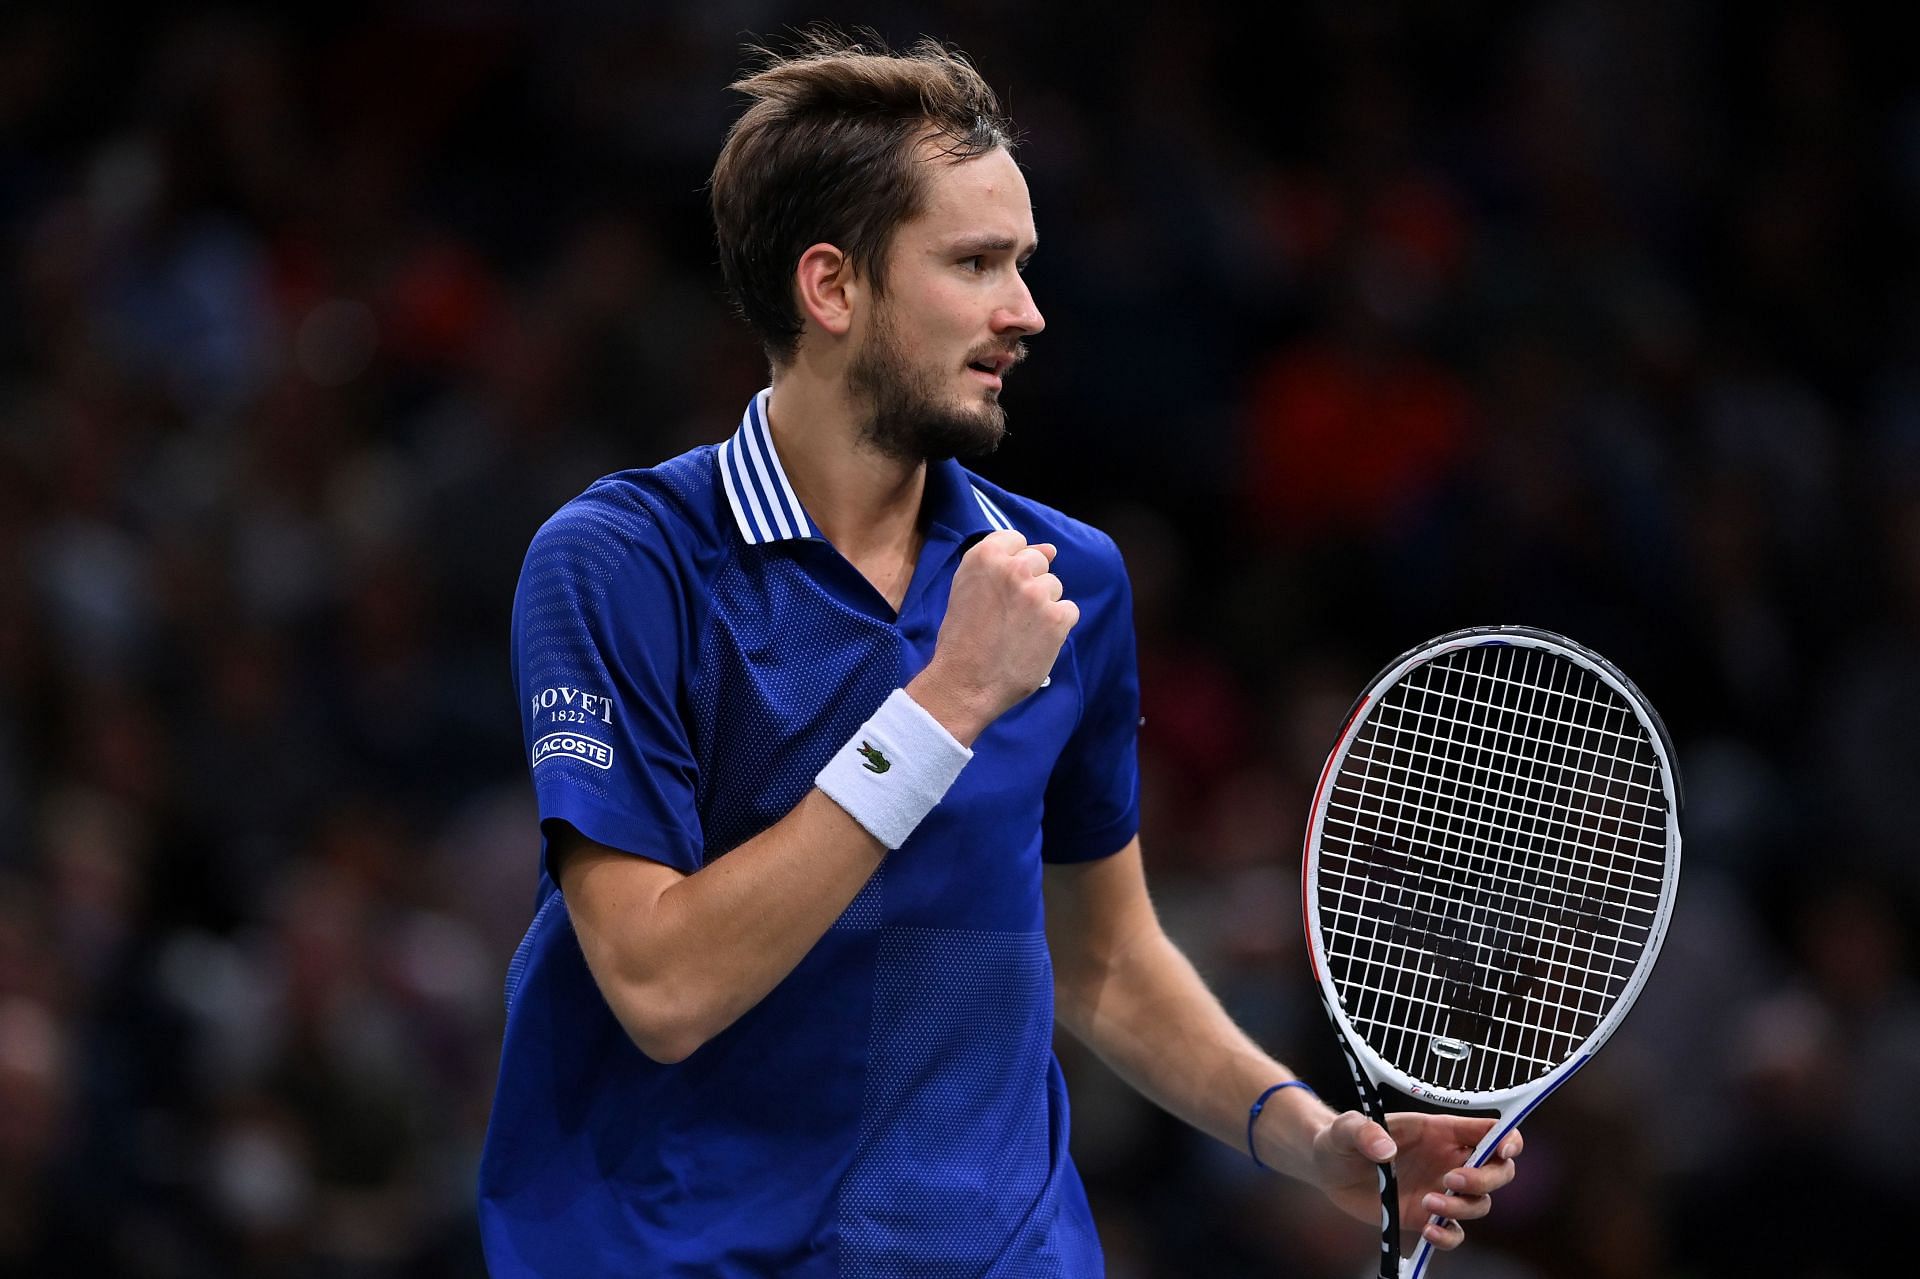 Daniil Medvedev prevailed over an overtly aggressive crowd in the Paris Masters